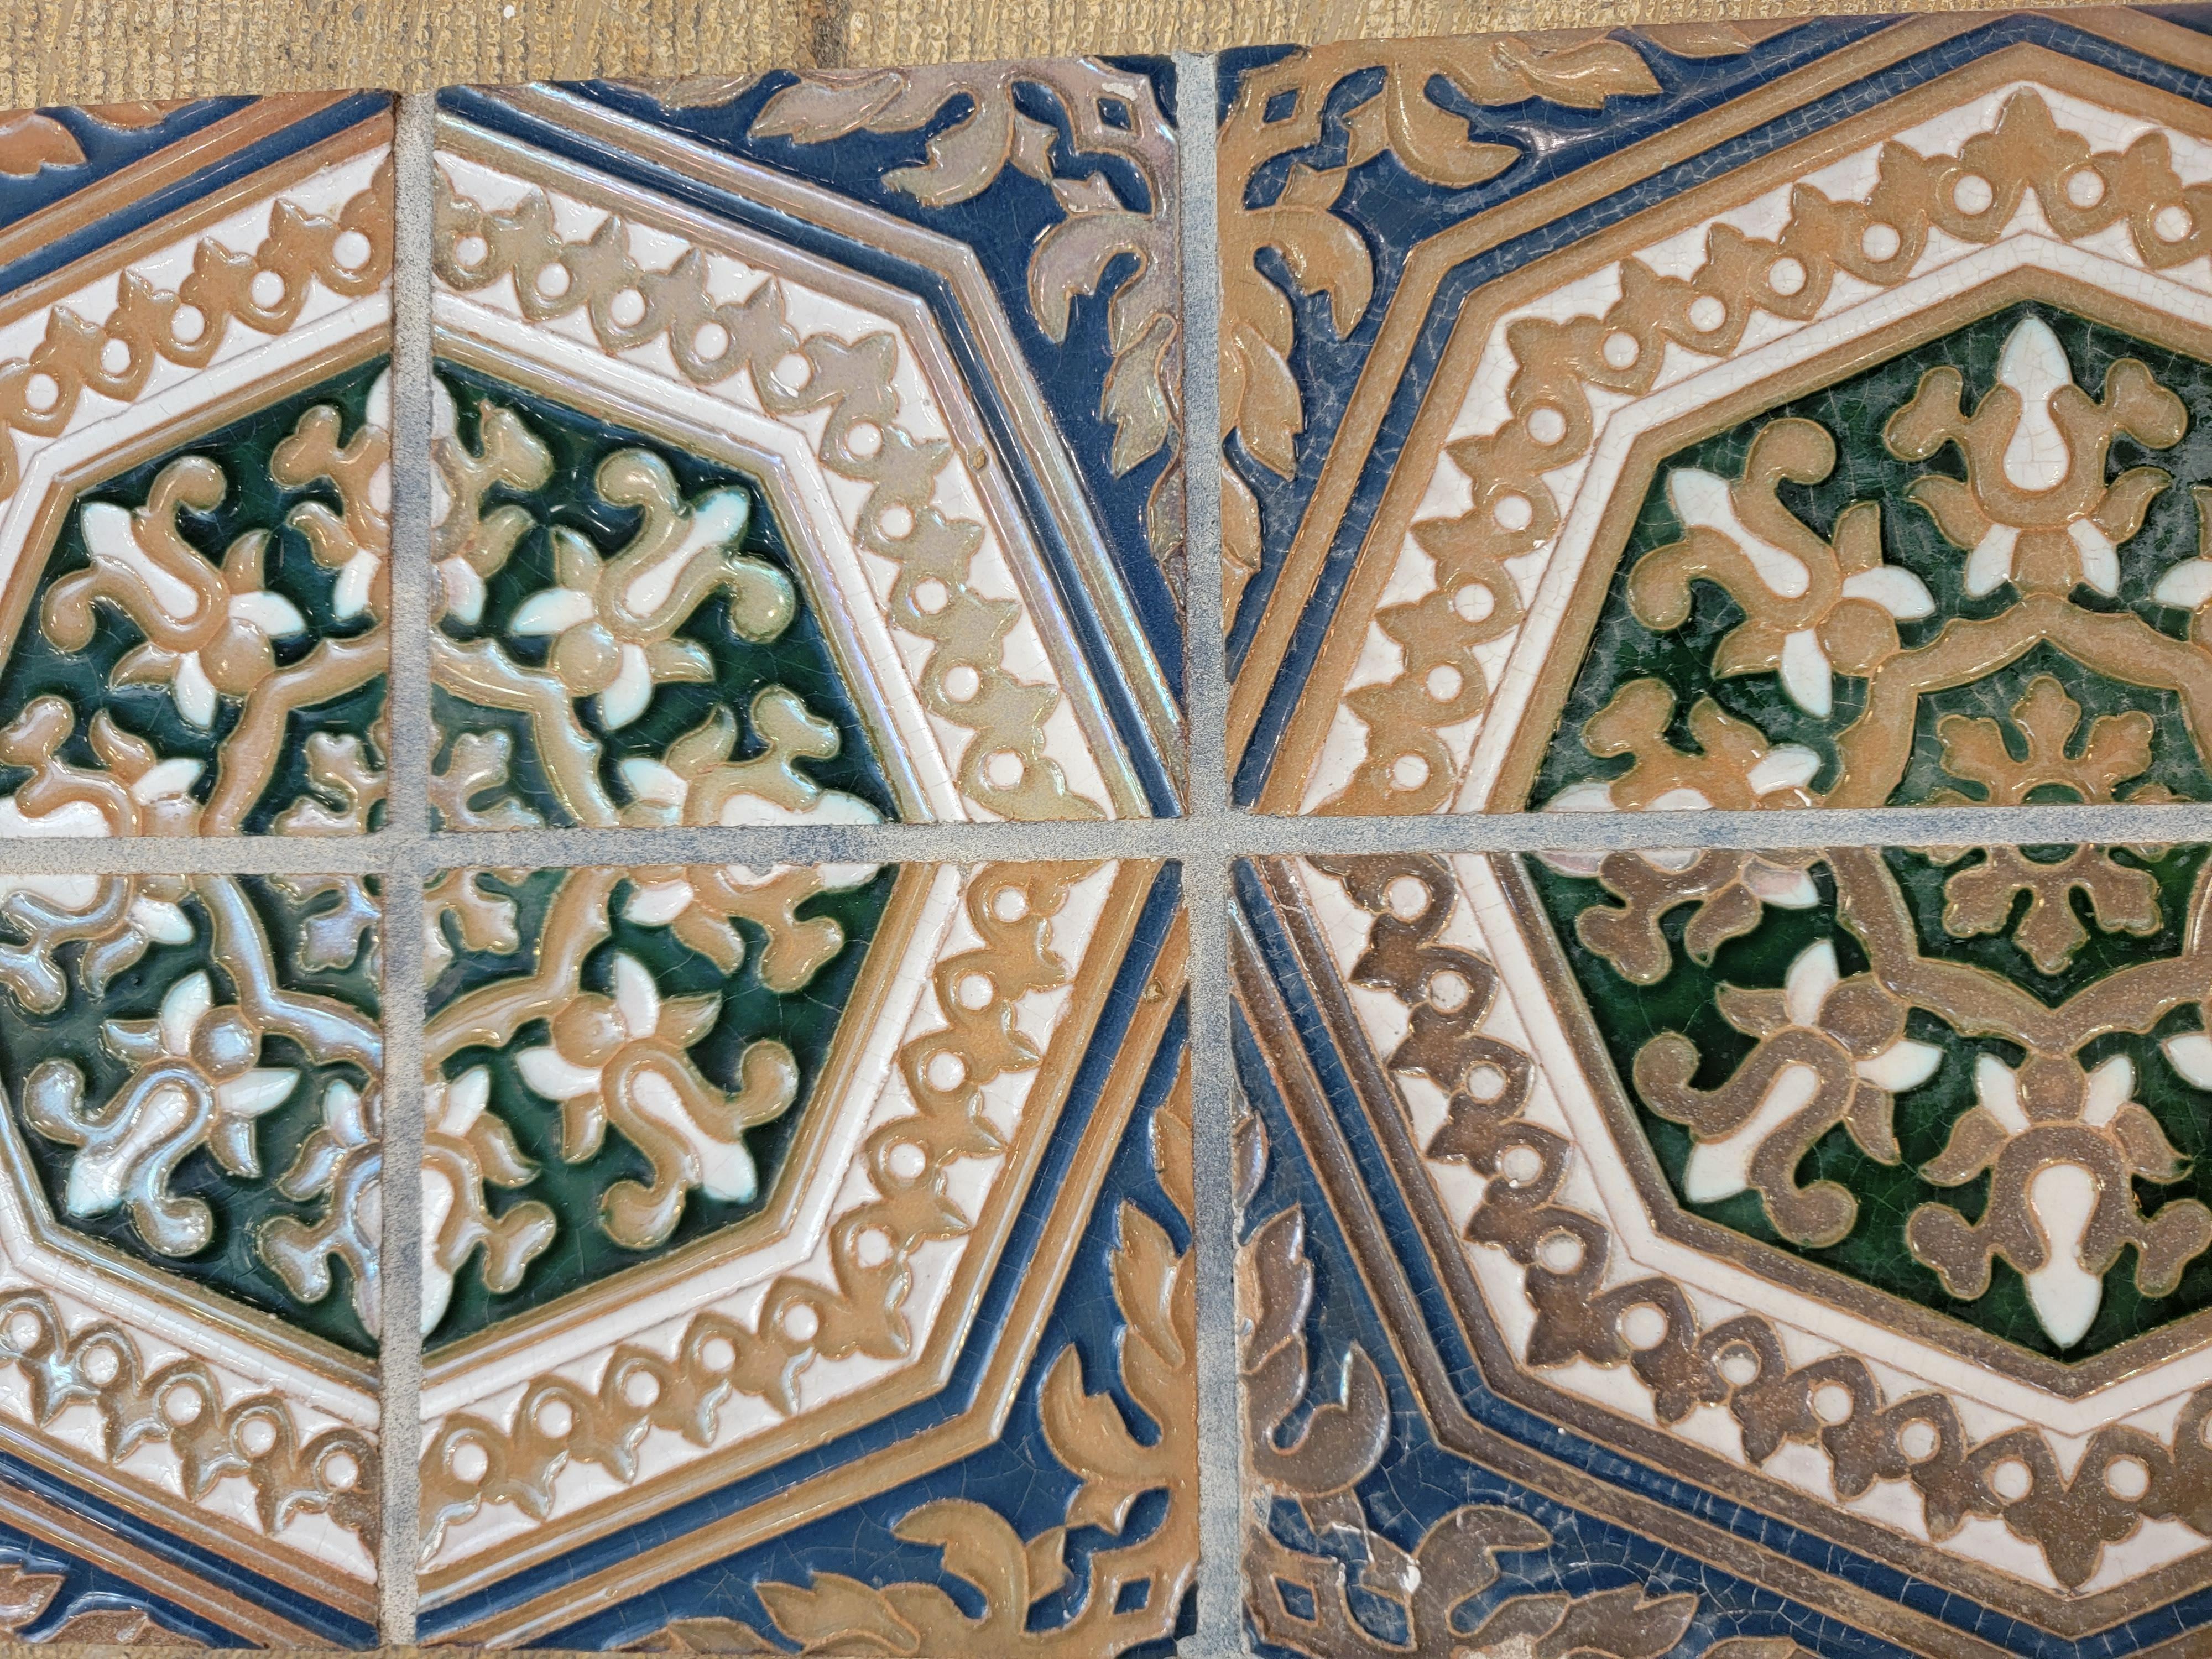 Octagonal Blue and Beige Tile Wall art or Table Top In Good Condition For Sale In Pasadena, CA